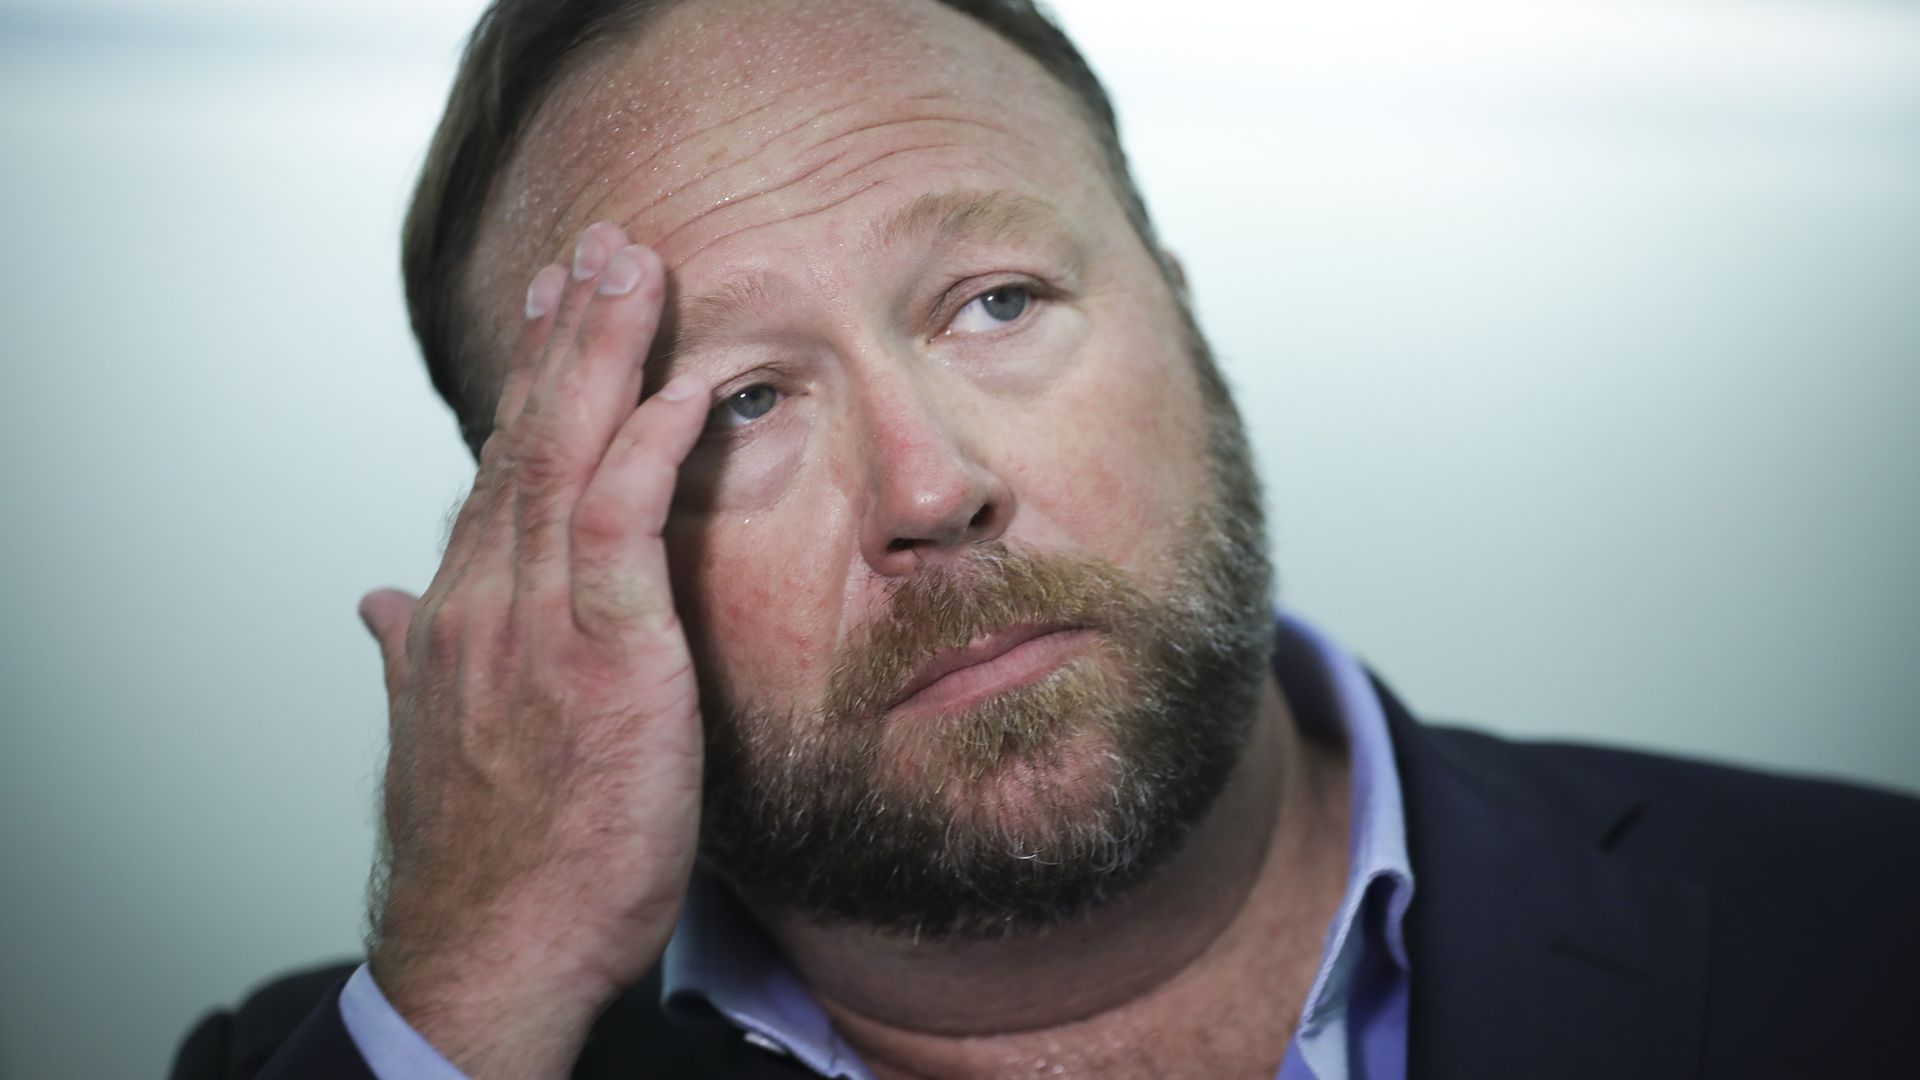 Photo of Alex Jones wiping his face with his right hand